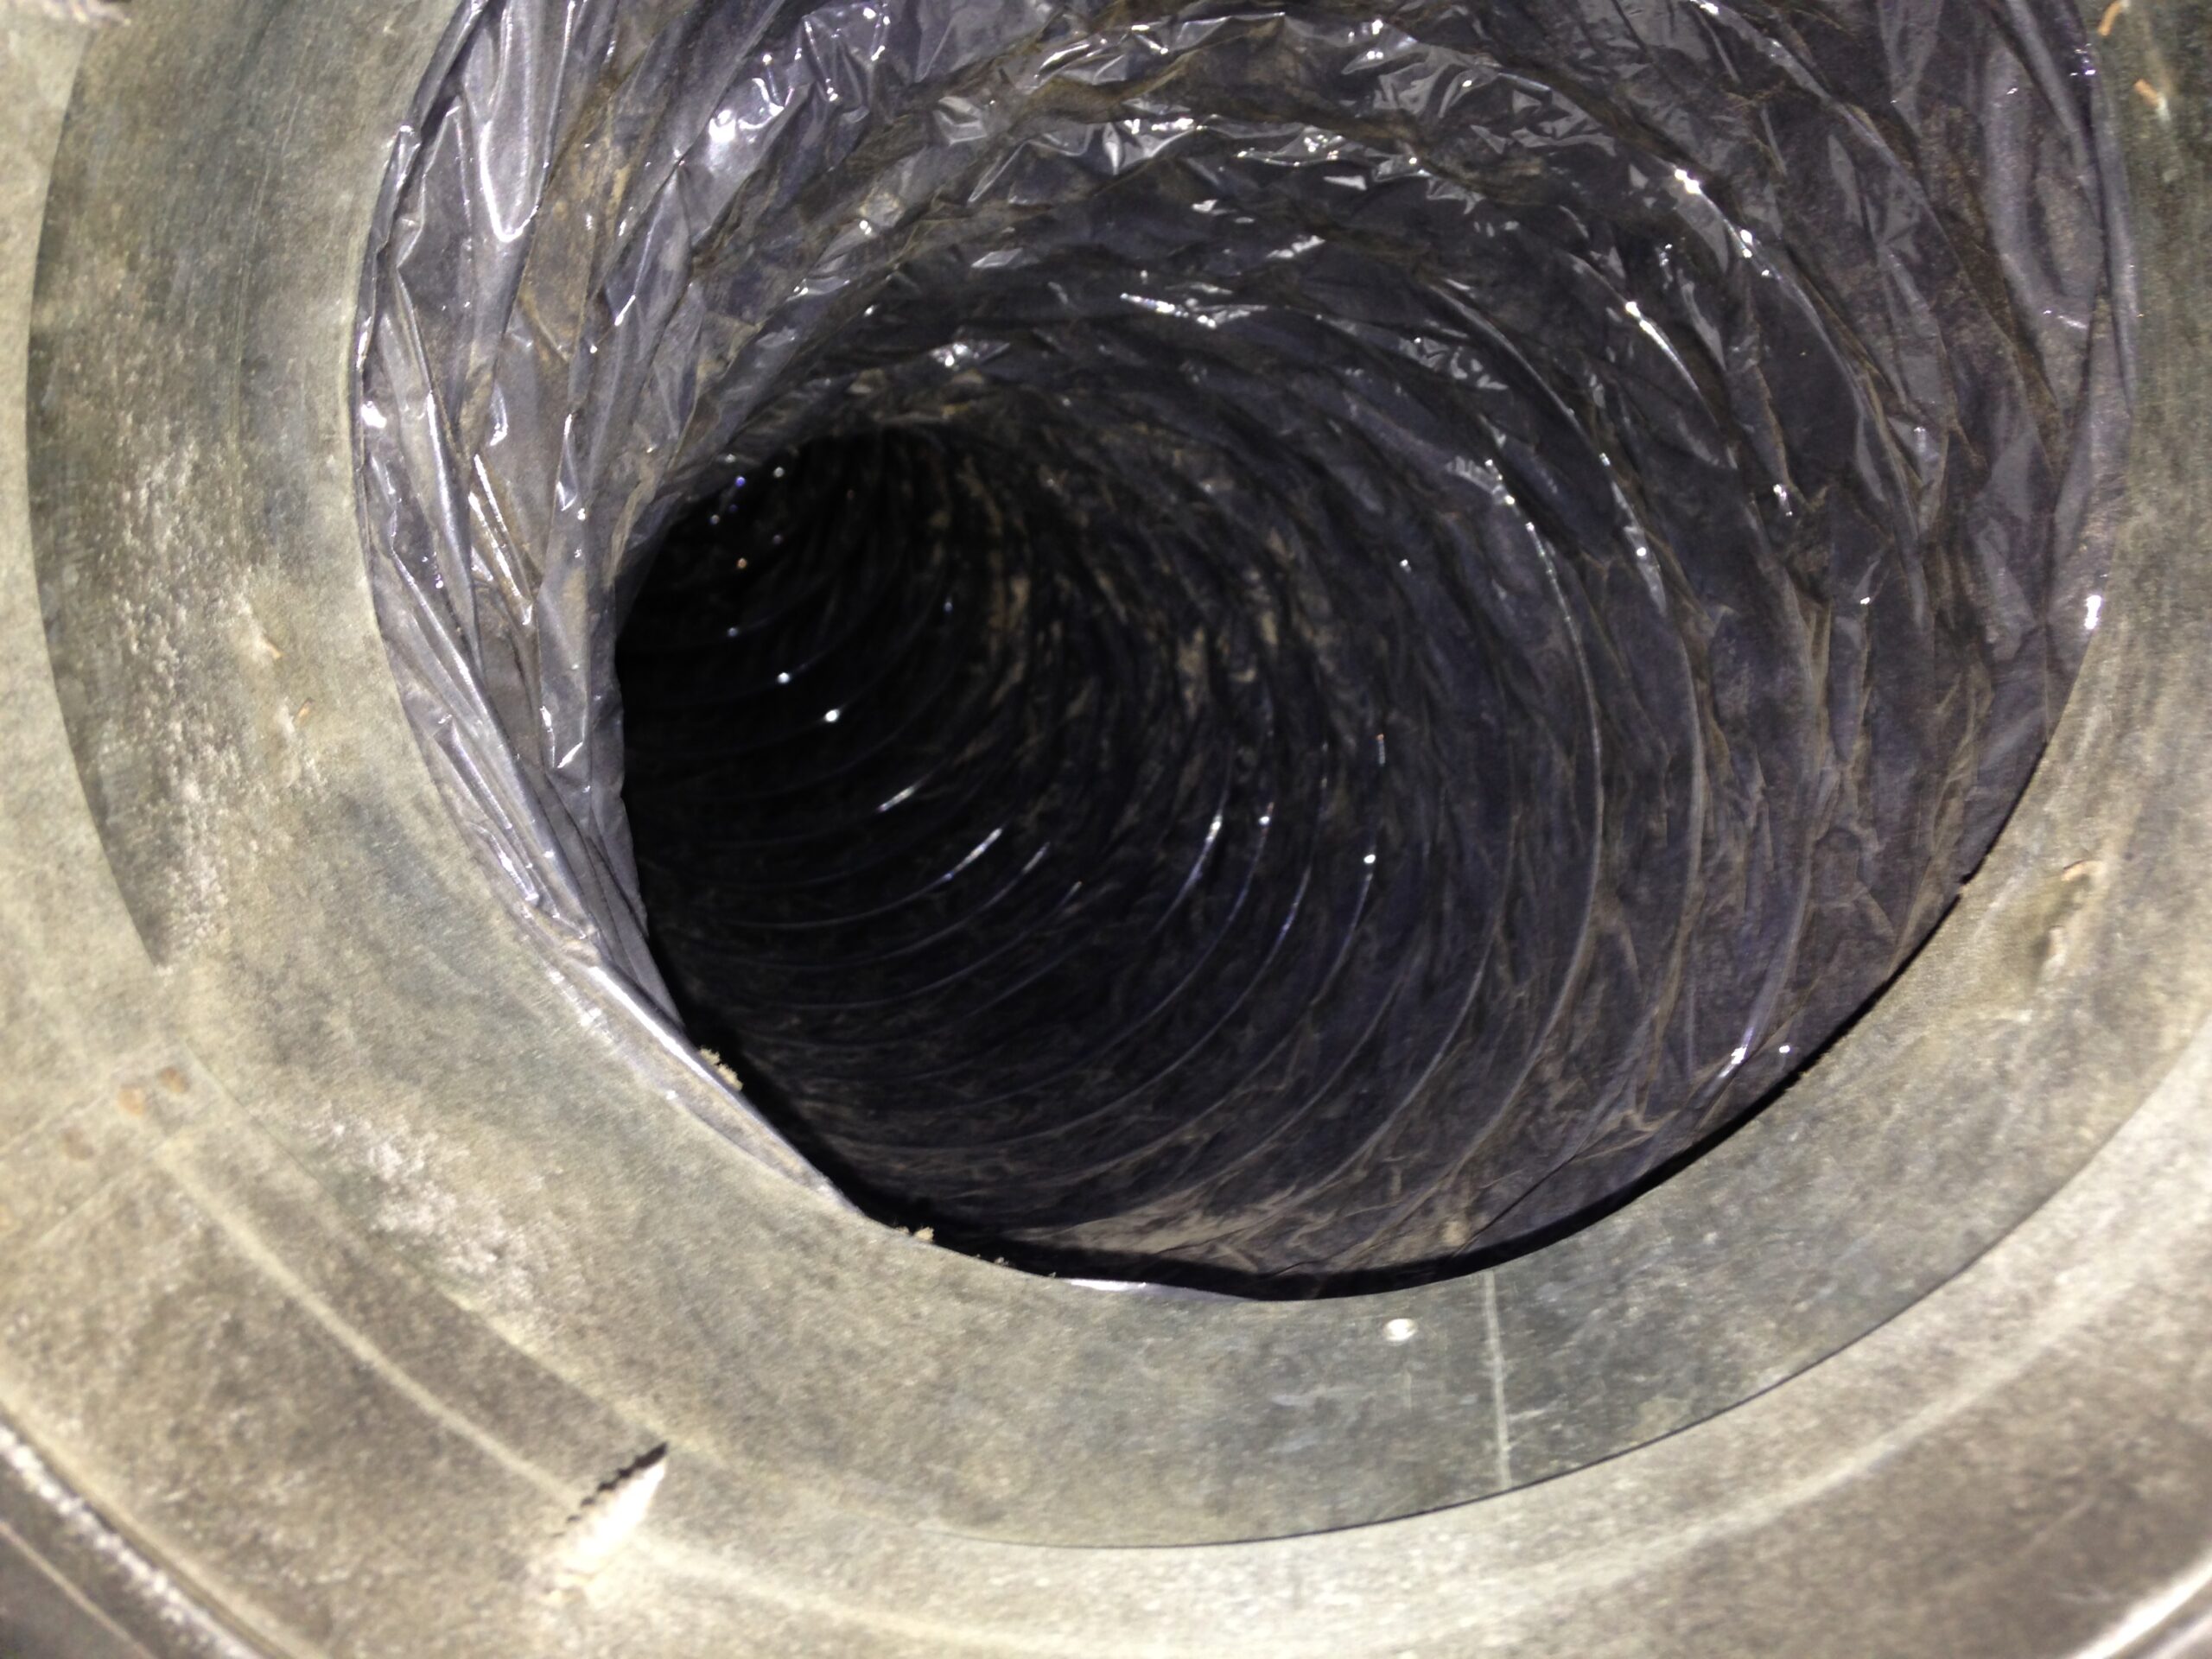 A/C flex ducting after they have been cleaned by A-1 Duct Cleaning & Chimney Sweep in Orange County, CA